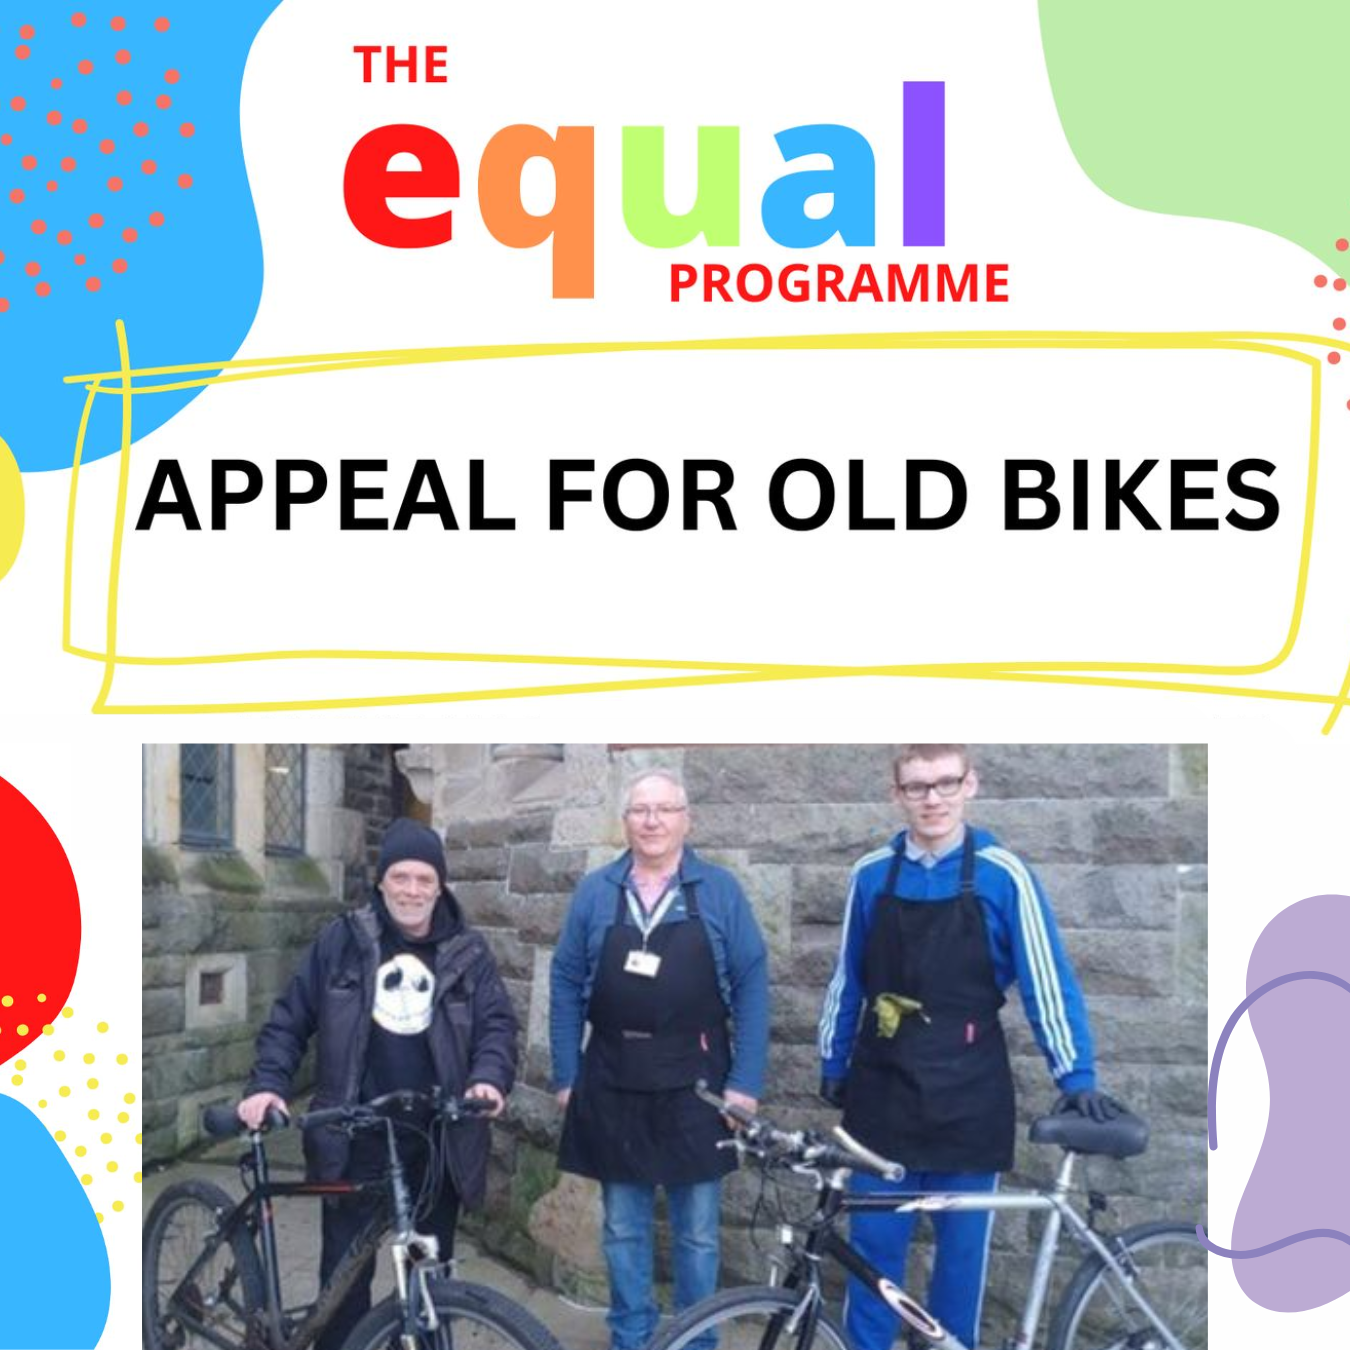 Appeal for old bikes picture with people standing next to bicycles